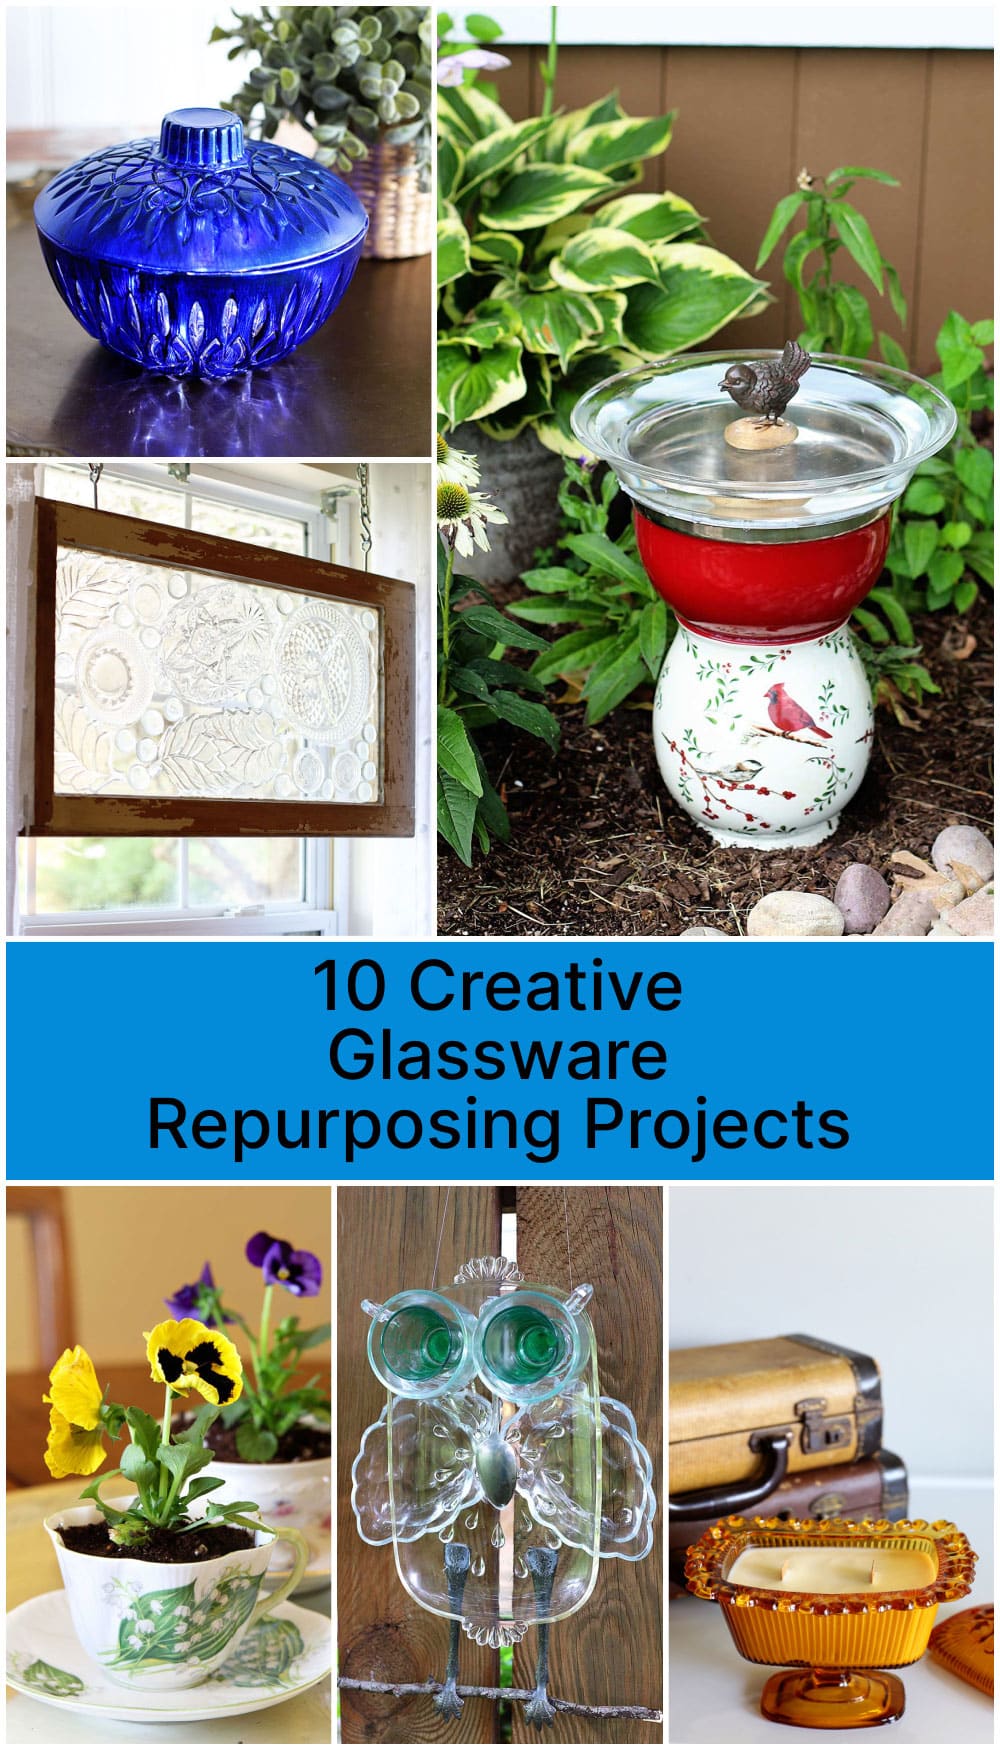 10 Quick and easy creative glassware repurposes for the home and garden.